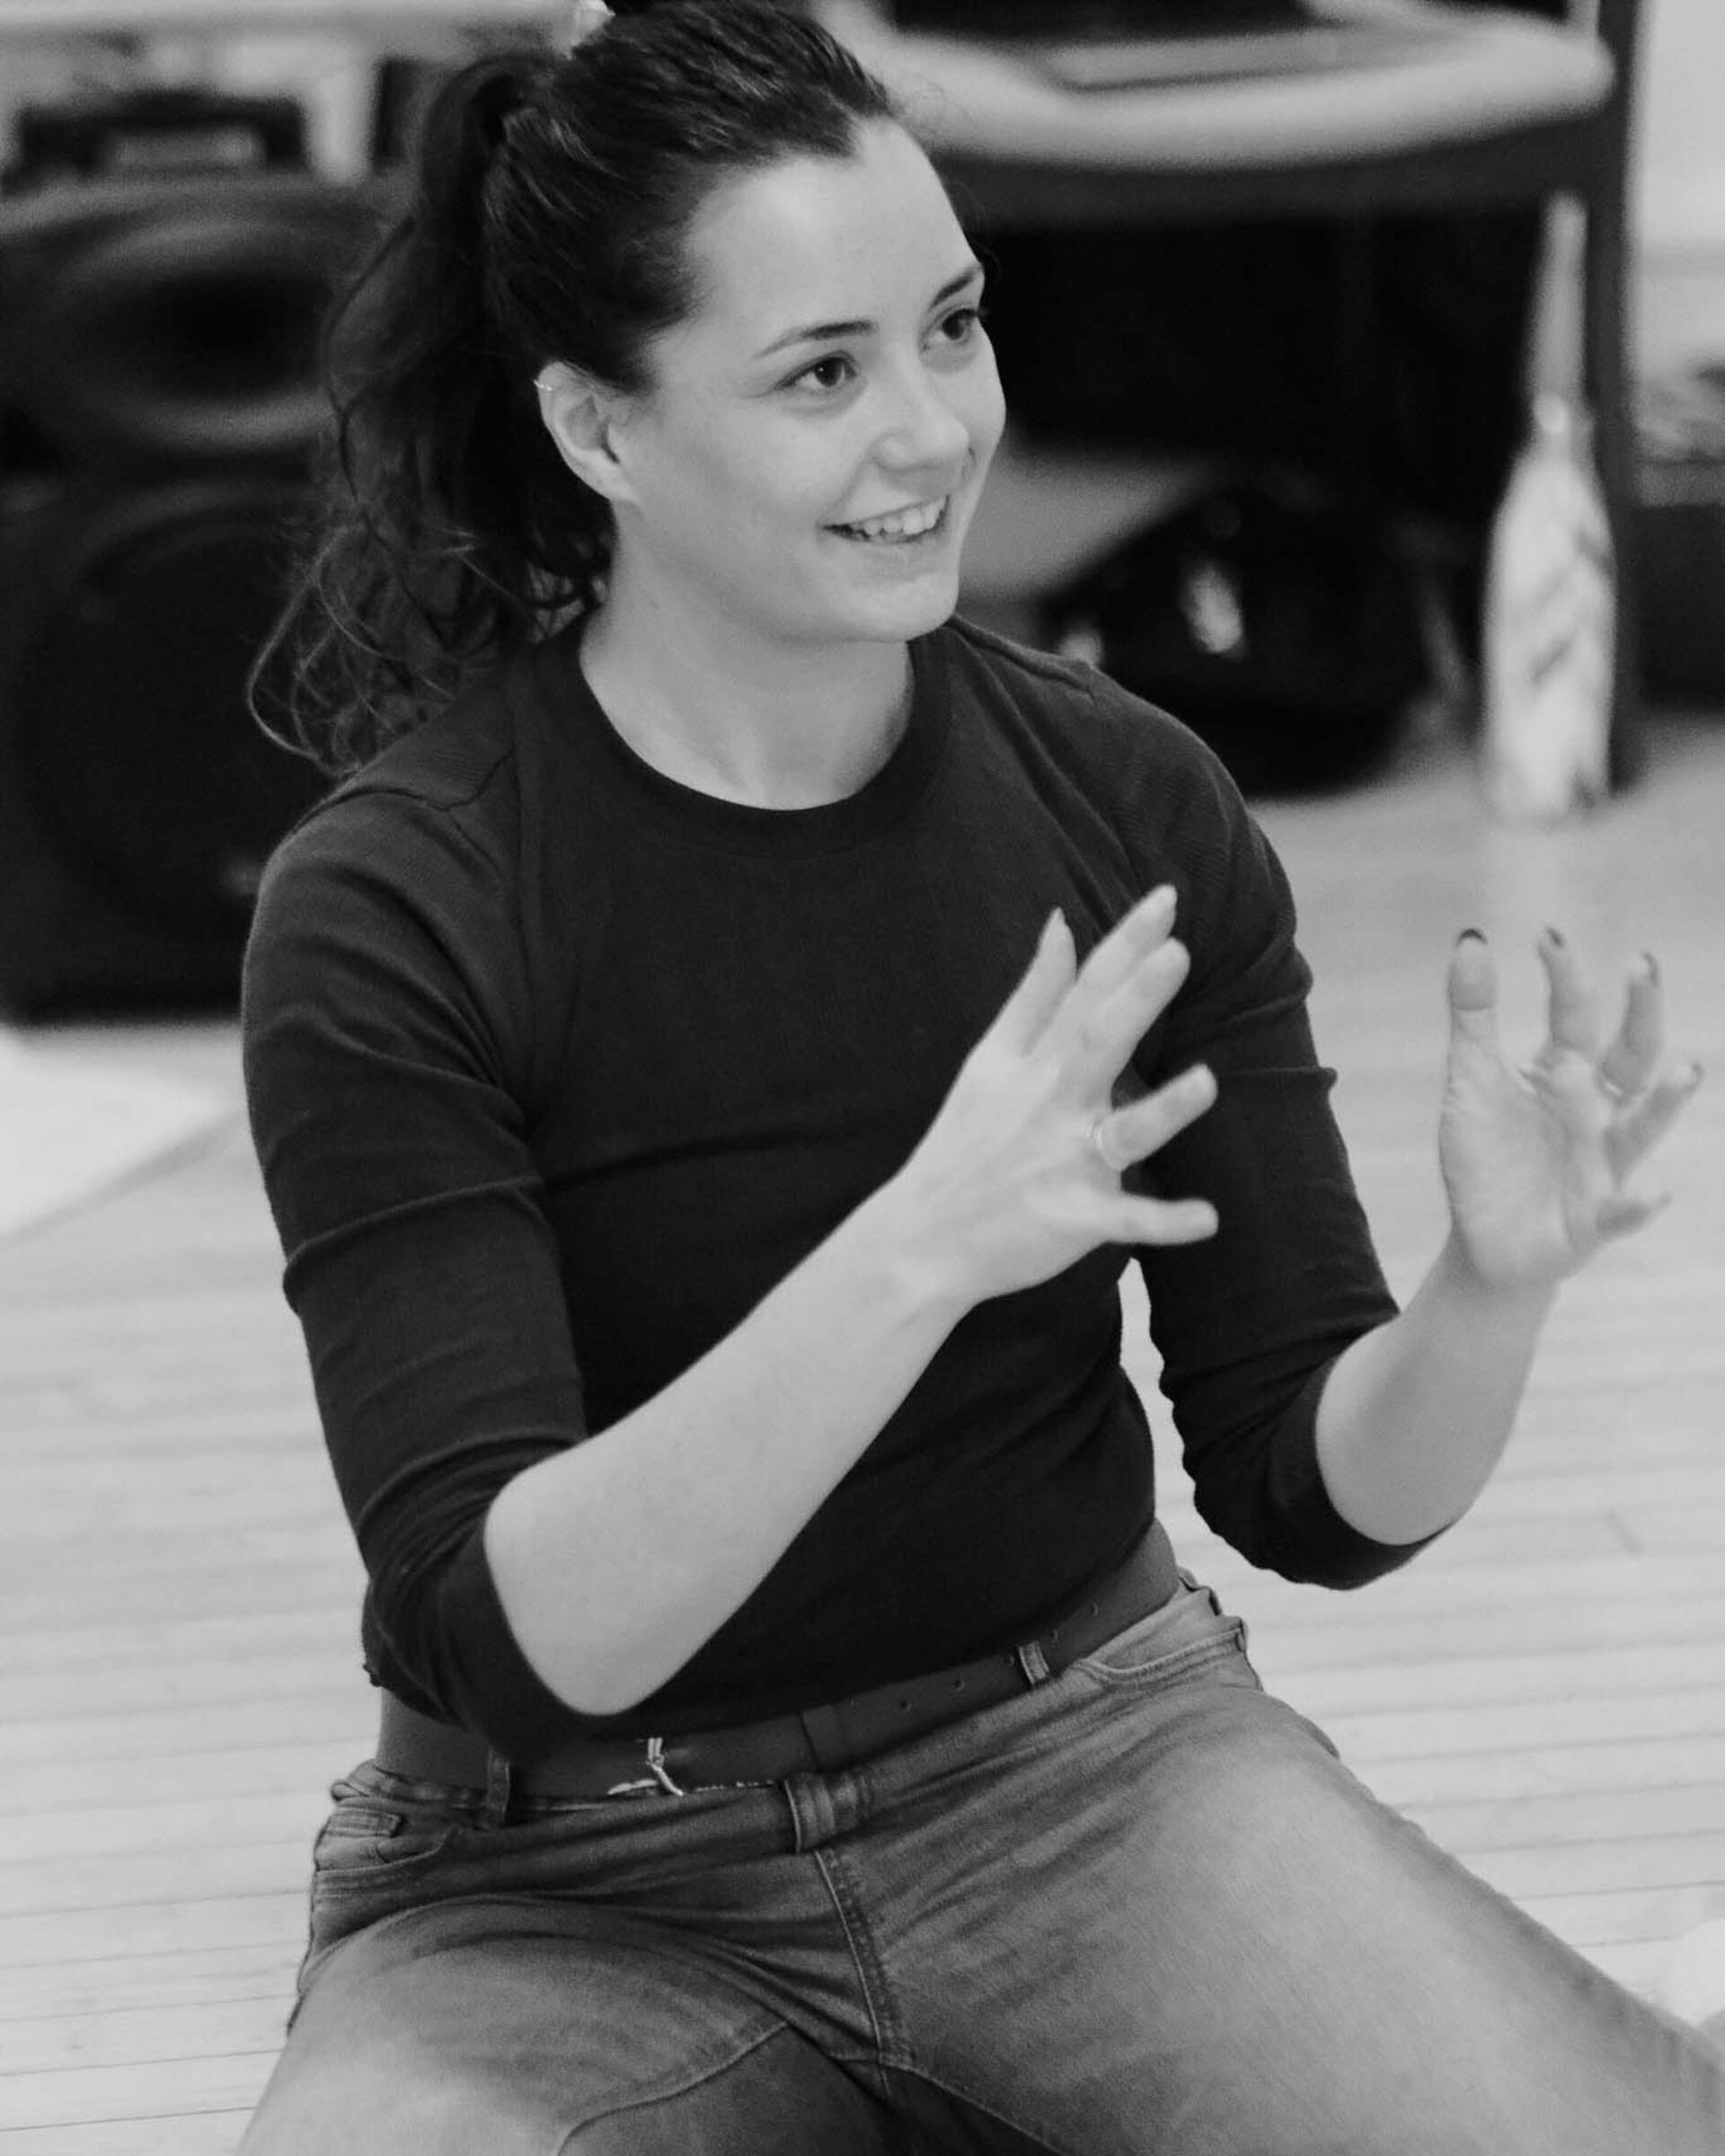 A picture of a young woman sat on the floor, smiling with her hands reaching out. It looks as though she is shaping something with her hands